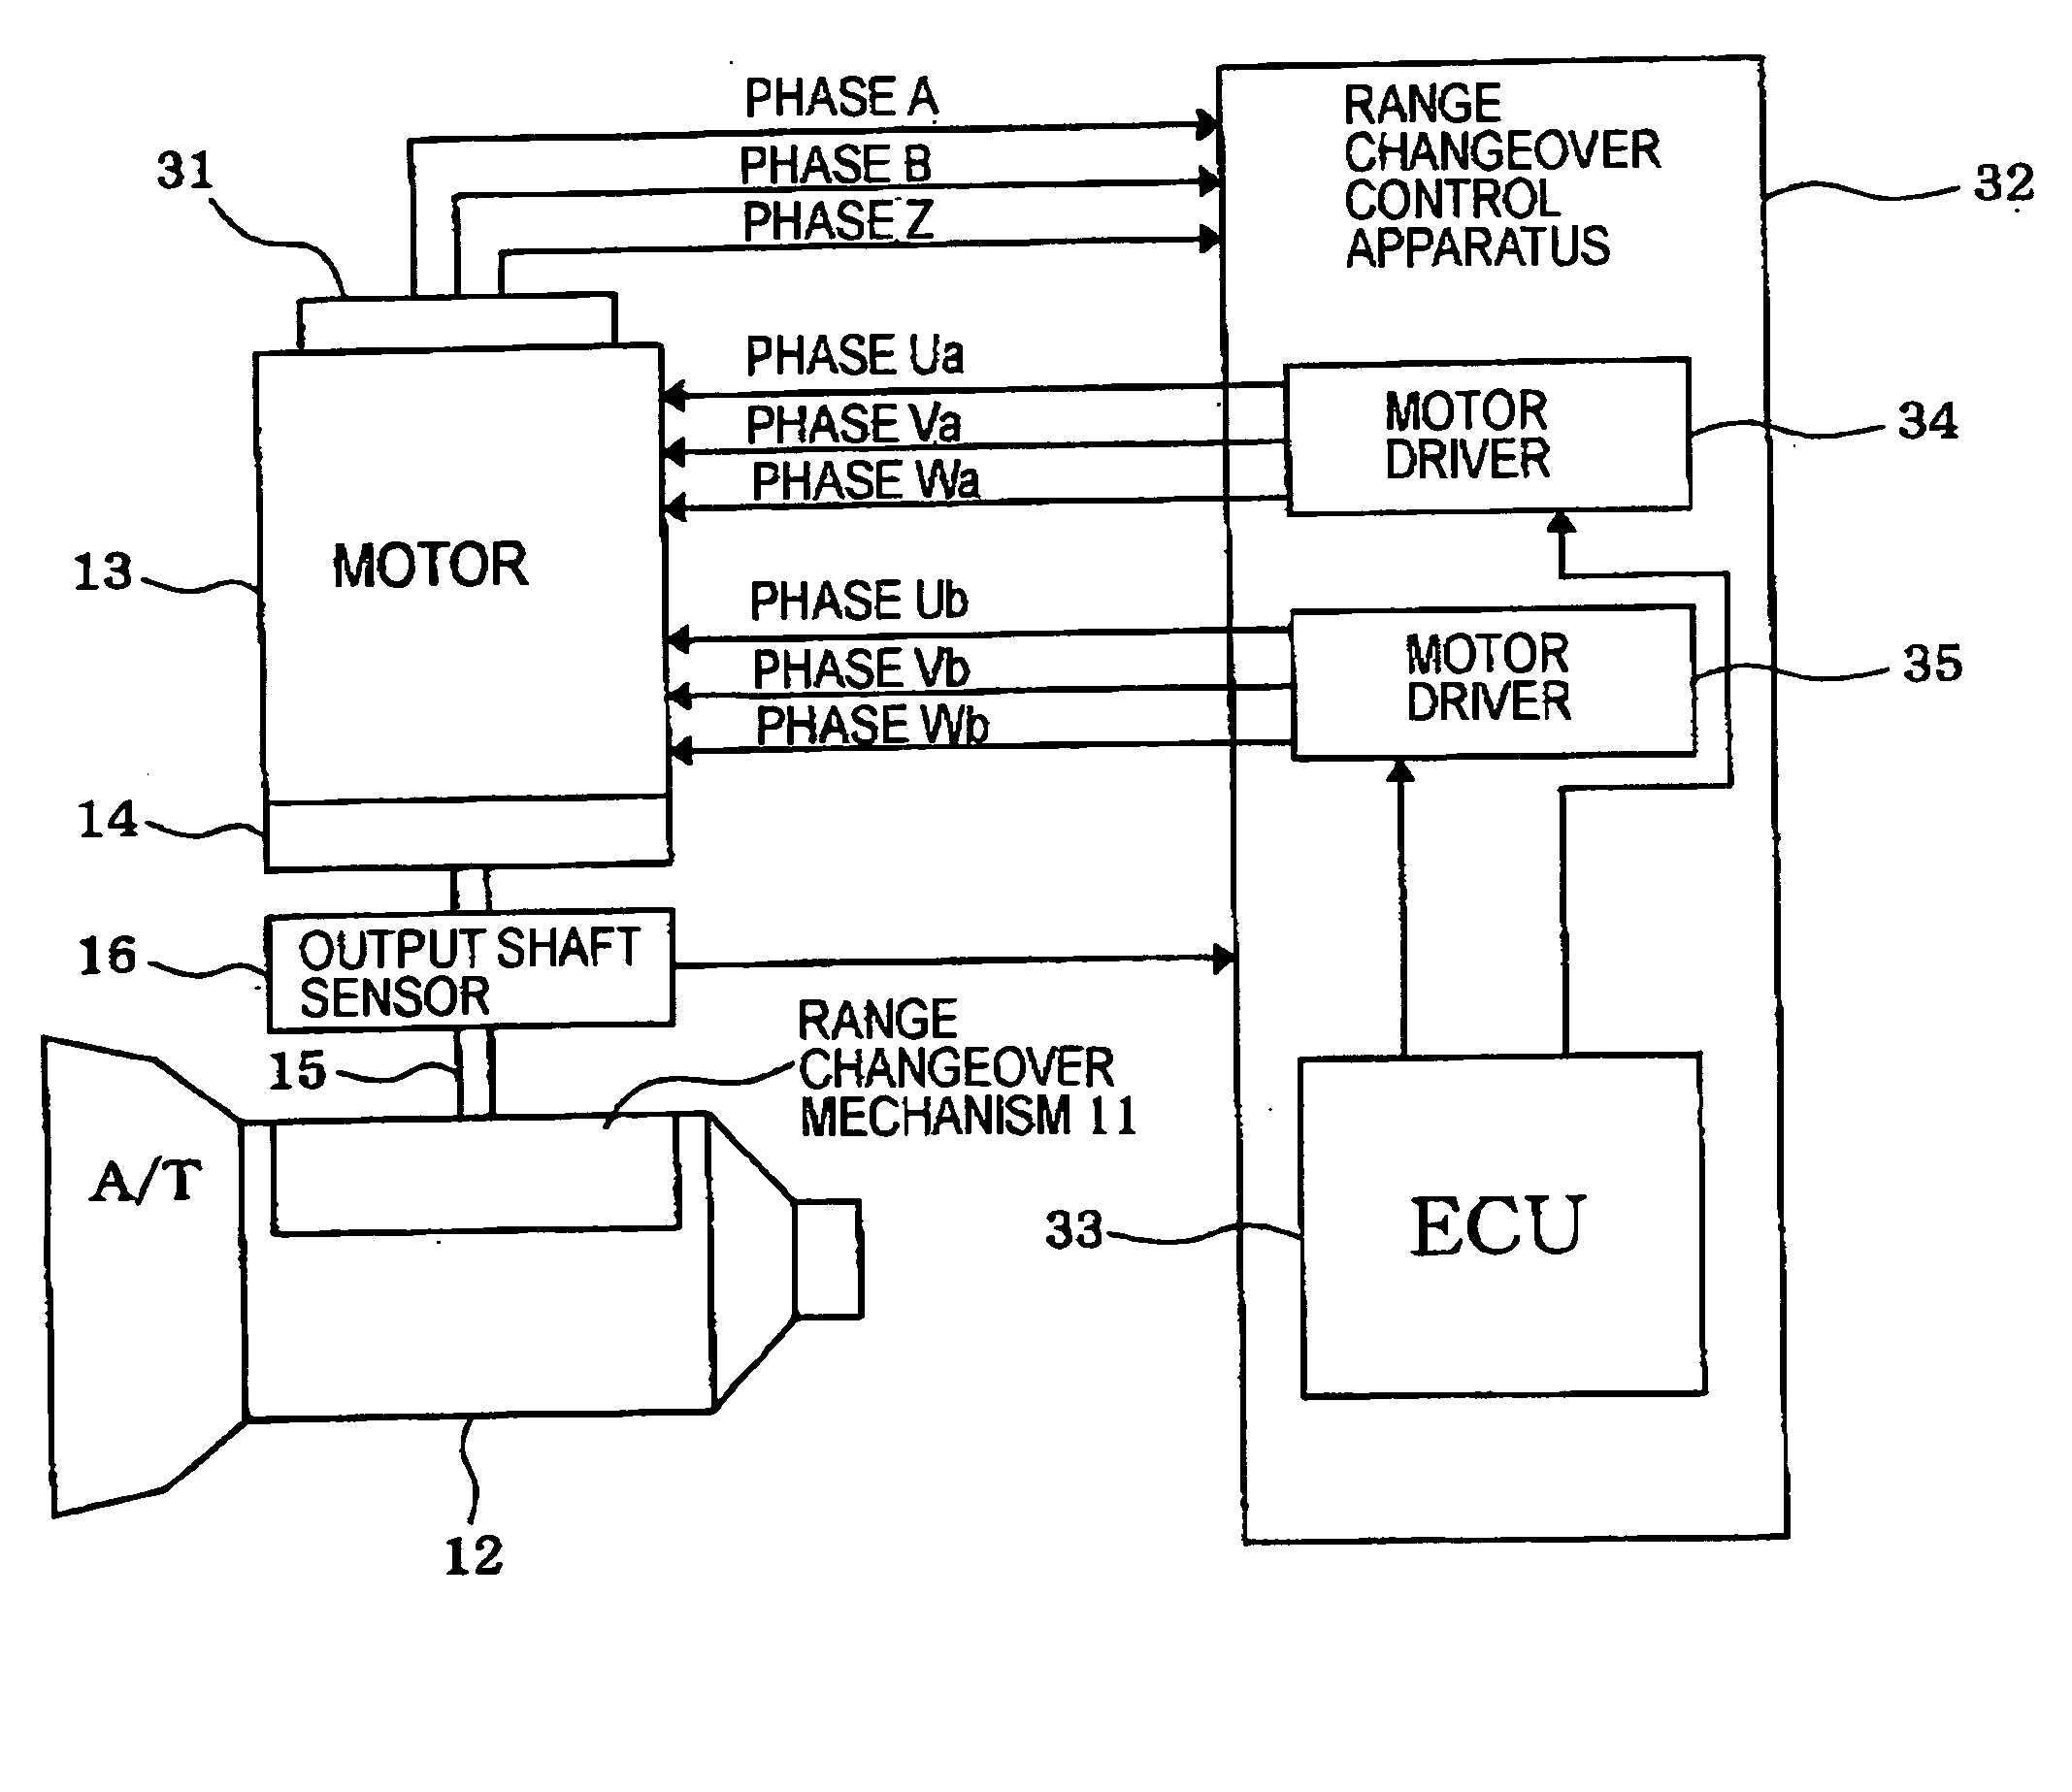 Motor control apparatus for controlling motor to drive output shaft with positioning accuracy unaffected by backlash in rotation transmission system